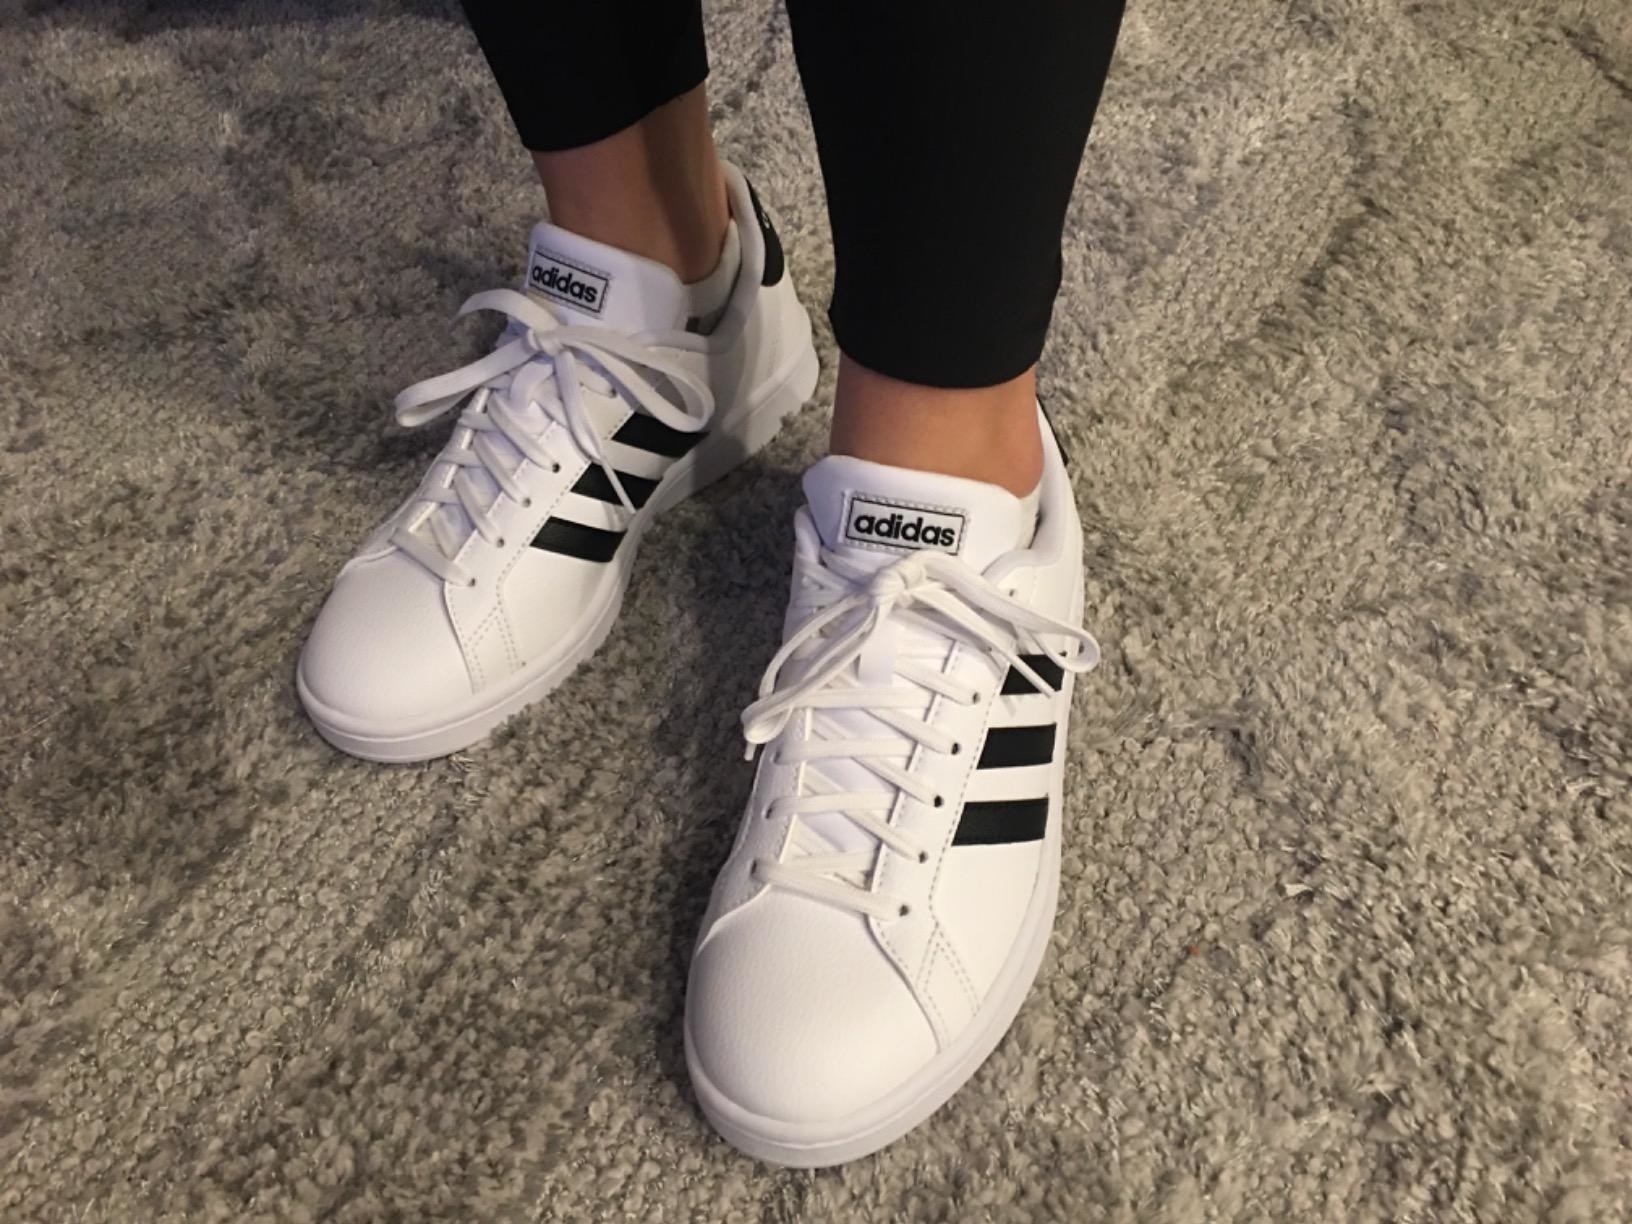 reviewer wearing white adidas shoes with black stripes on the side